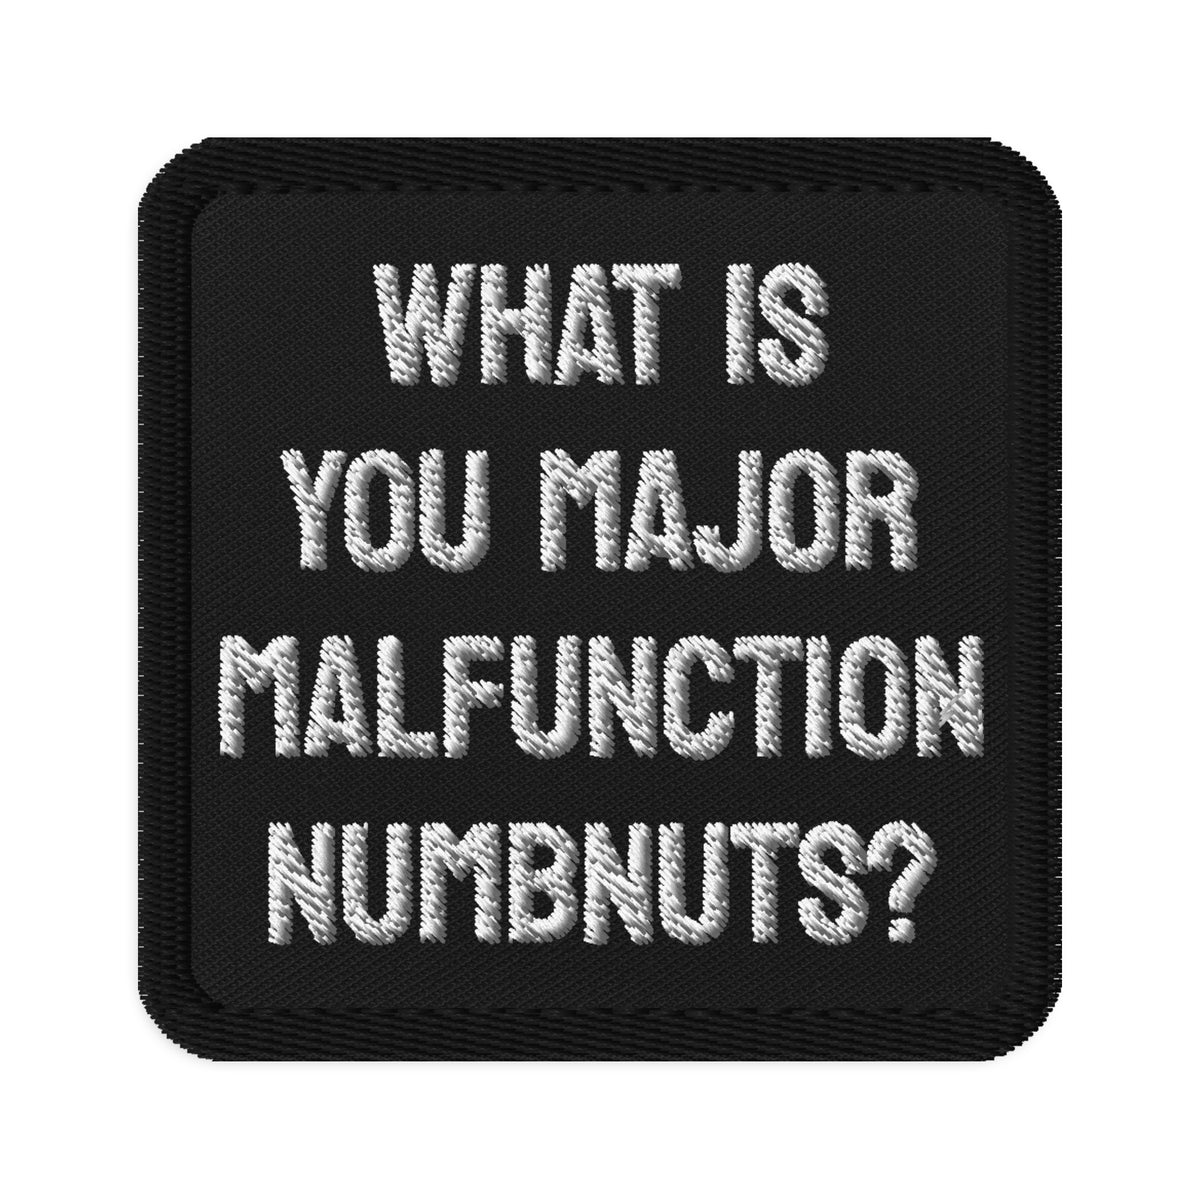 What is your Major Malfunction Numbnuts